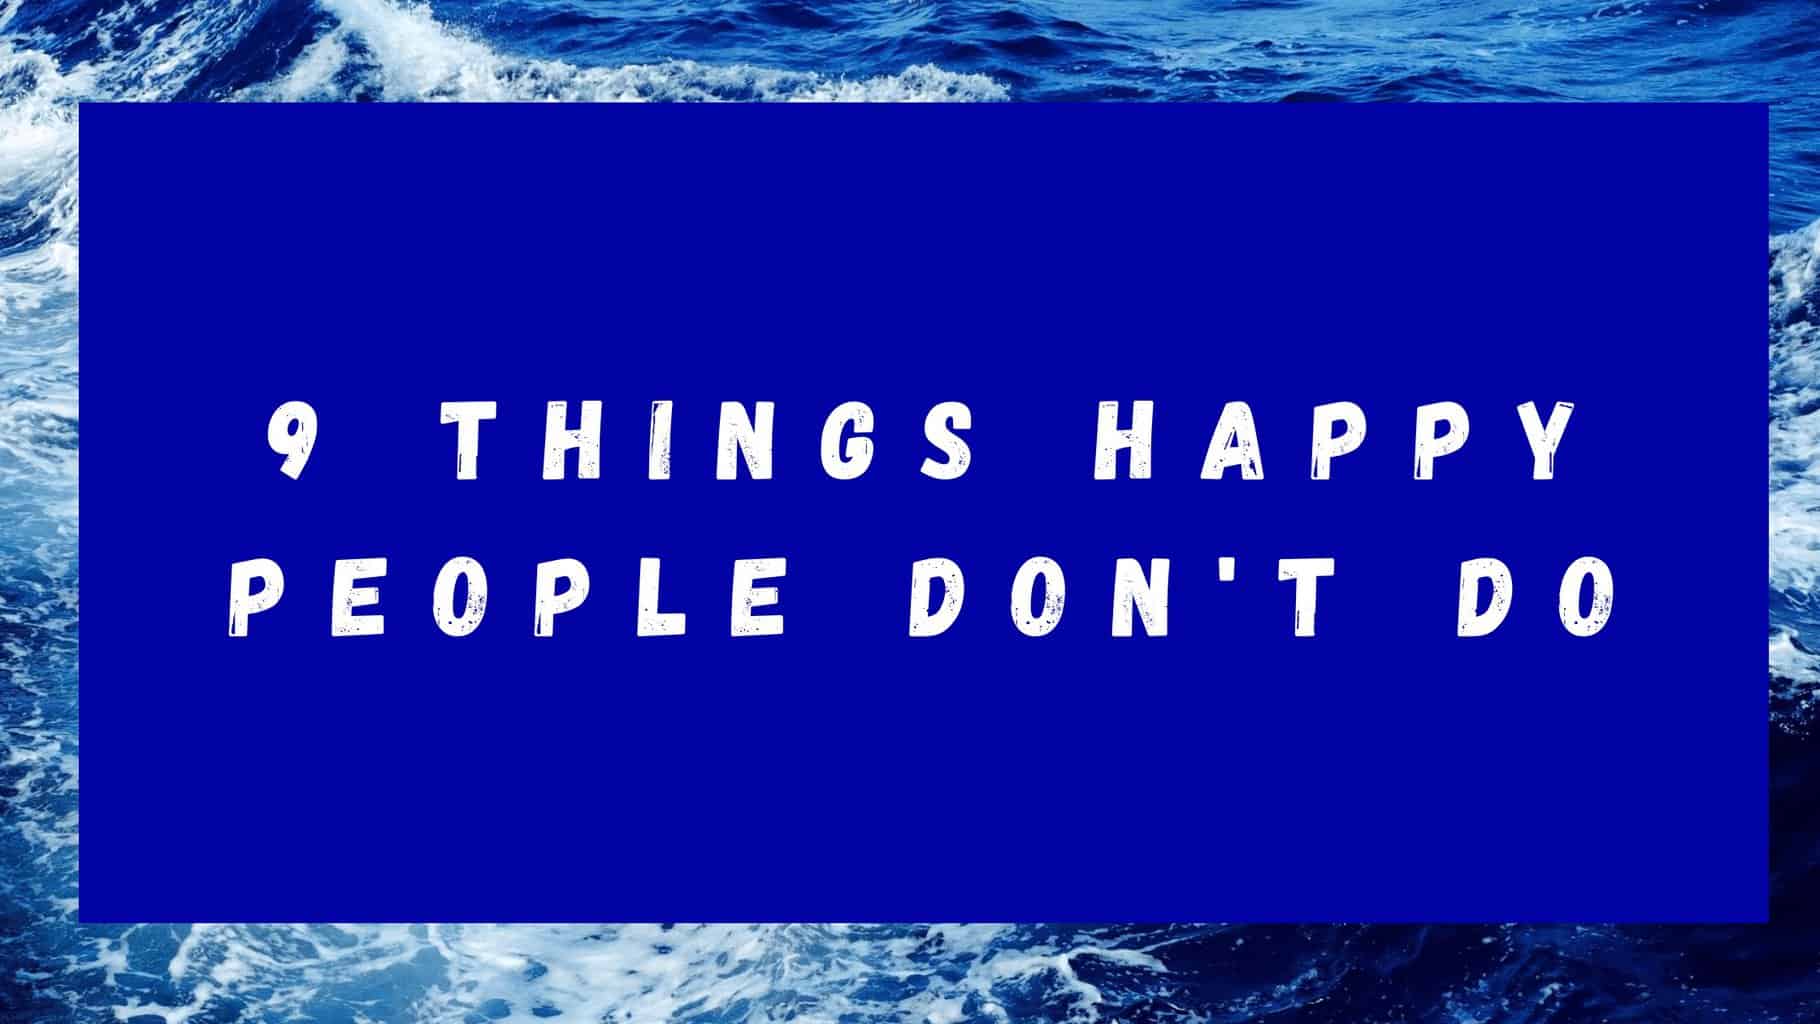 9 things happy people don't do